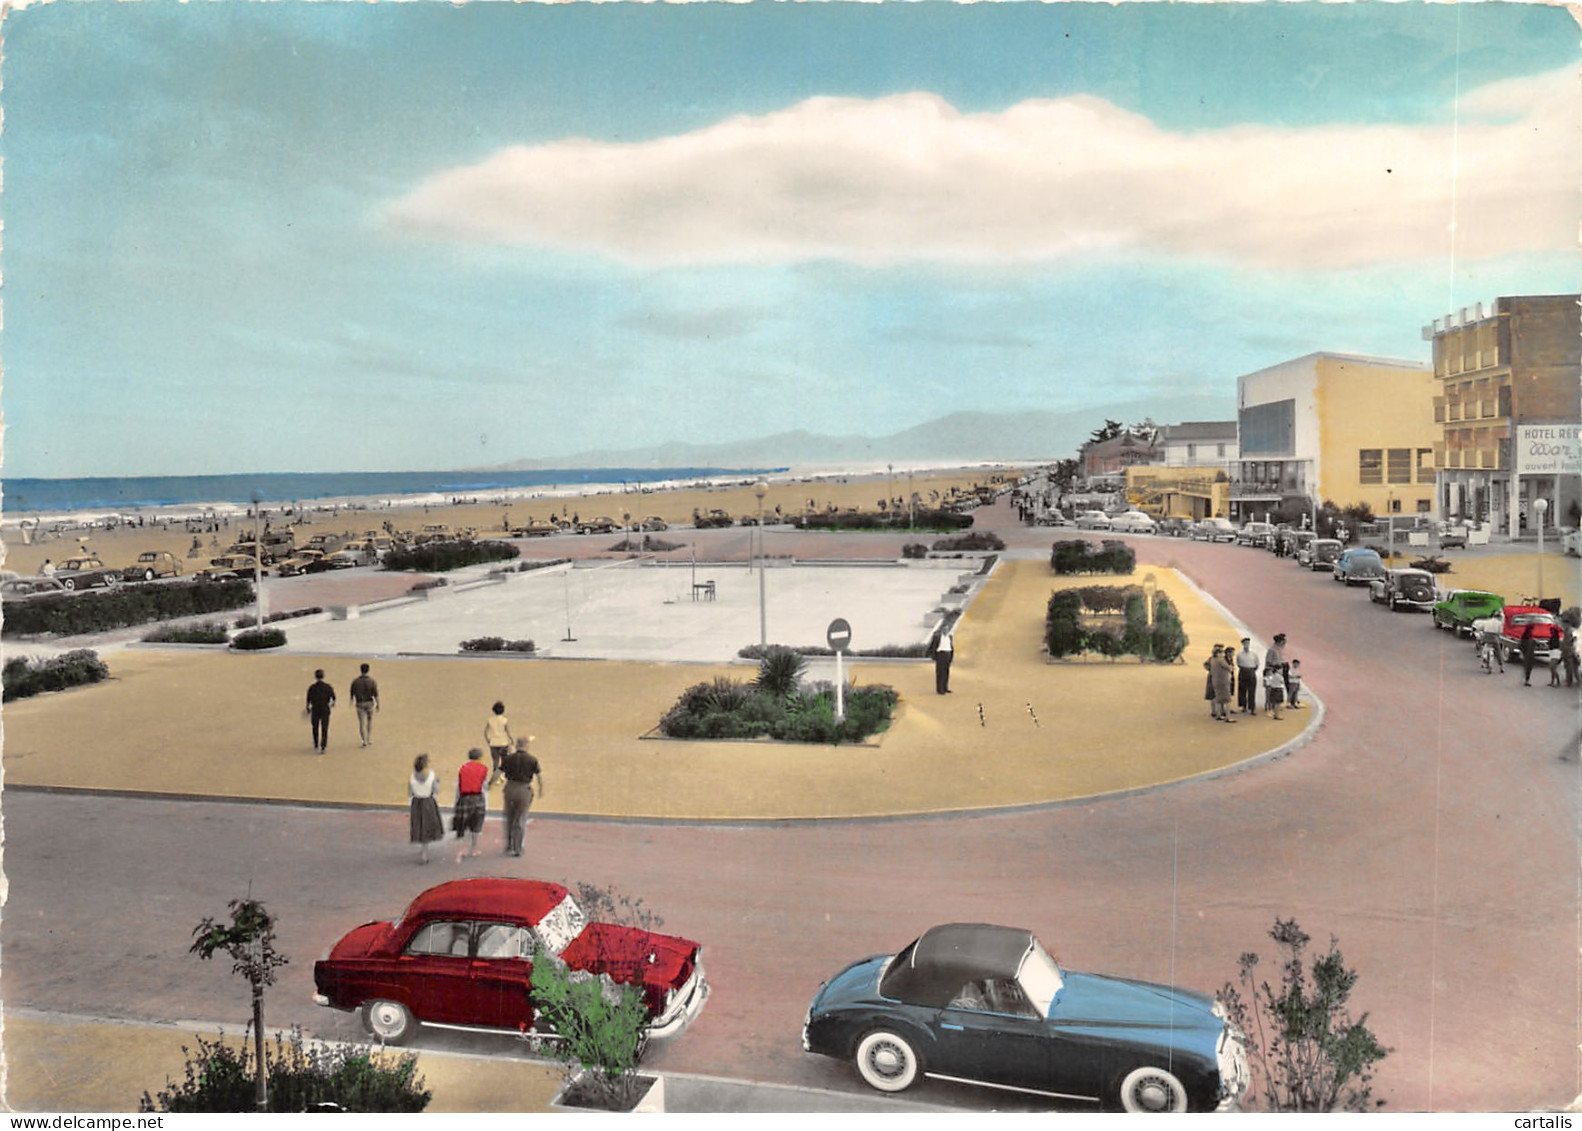 66-CANET PLAGE-N 603-A/0217 - Canet Plage